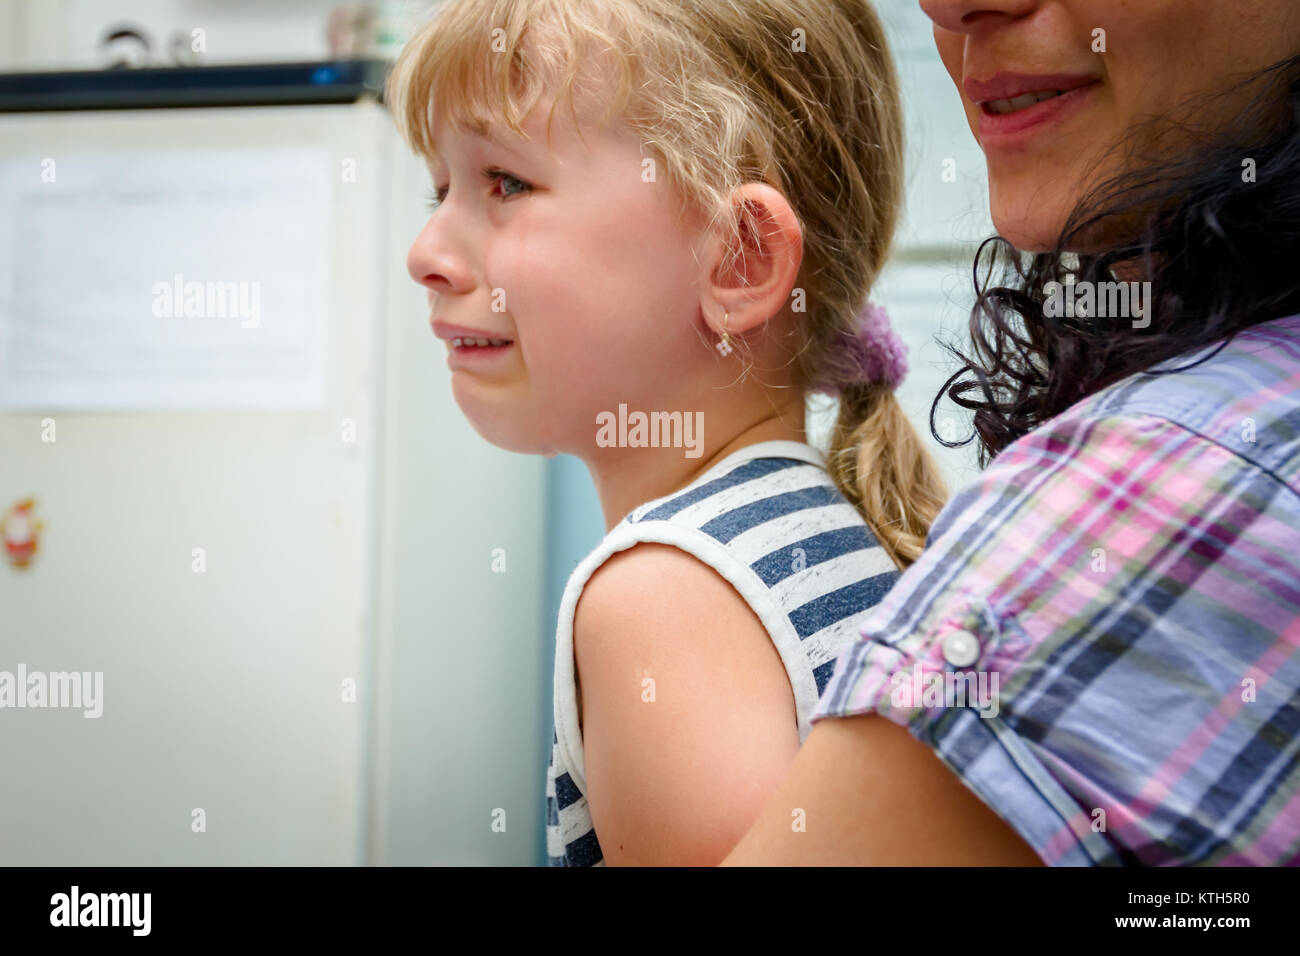 Preschooler child is cry after she has received vaccine, injection at doctor's office. Stock Photo